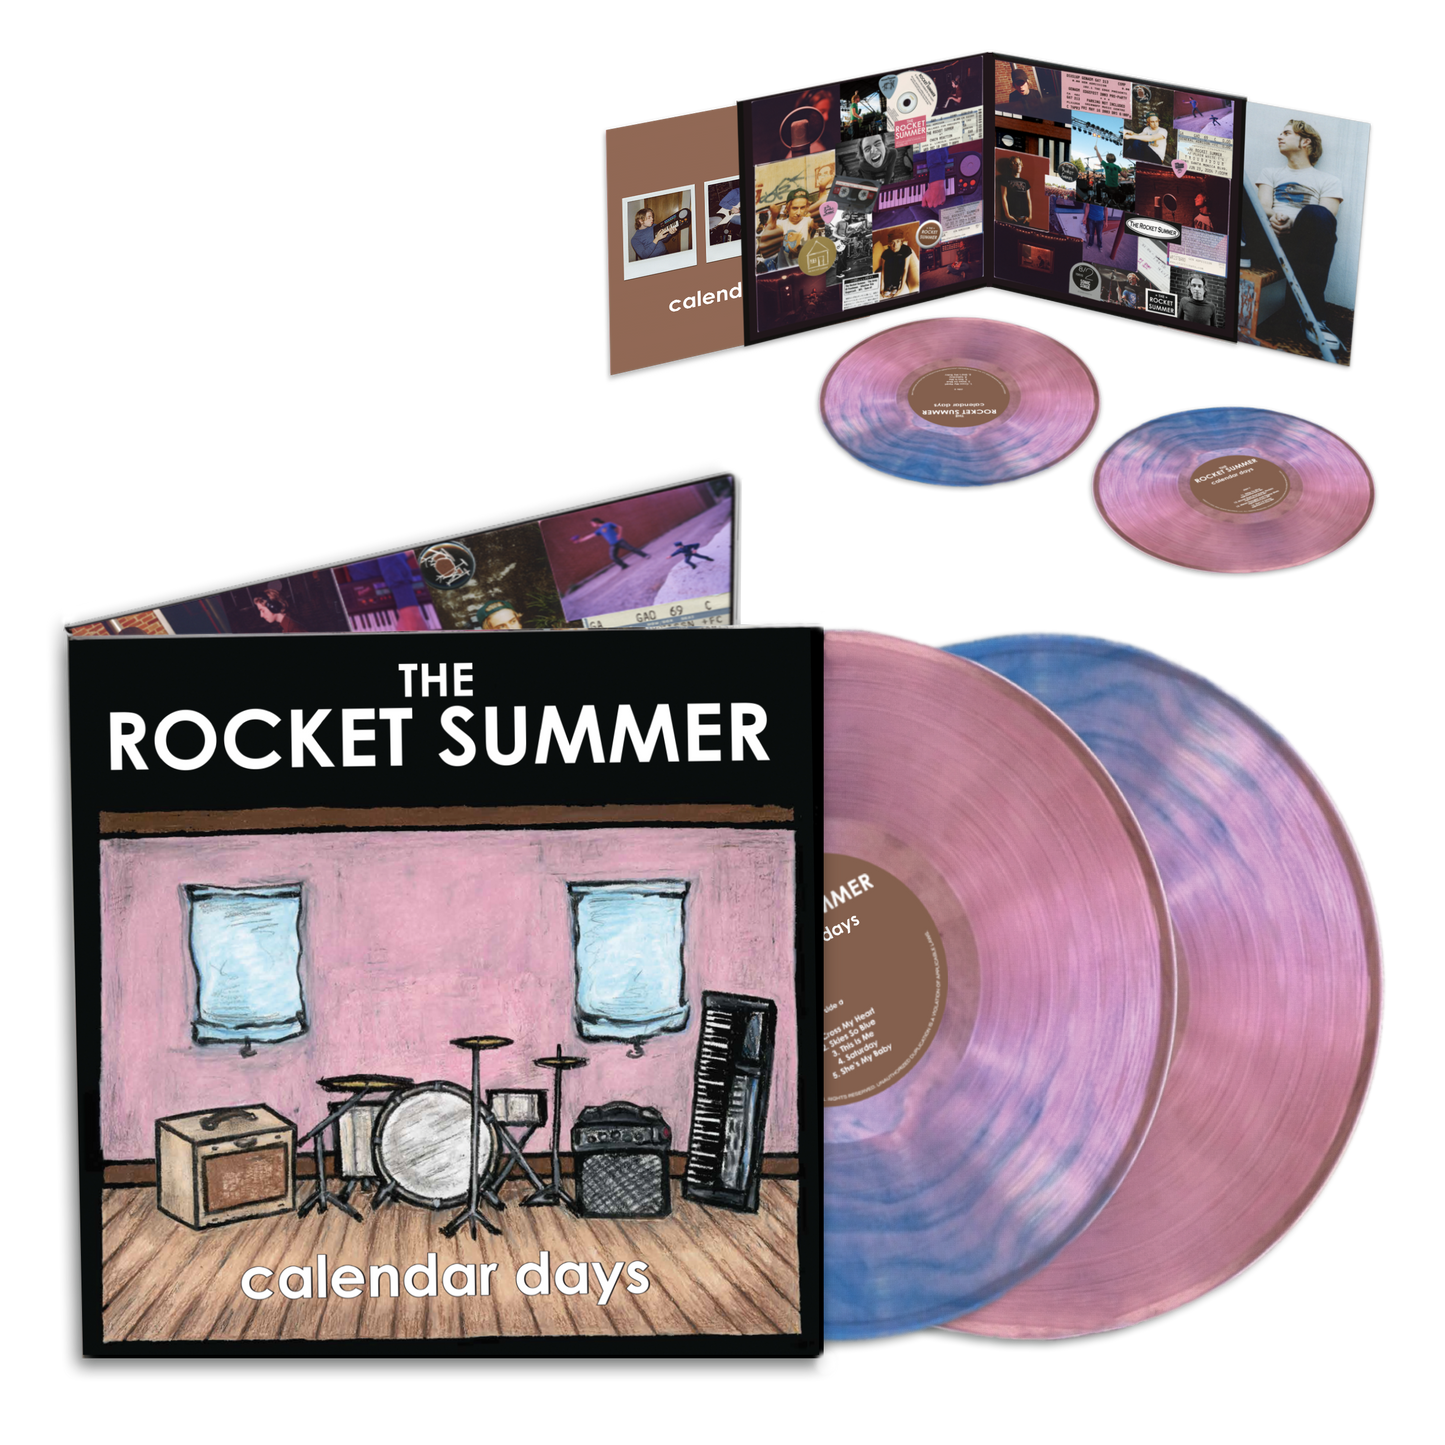 calendar days - Deluxe Double Vinyl Anniversary Edition on TRANSLUCENT SKY BLUE & COTTON CANDY PINK MIX (Includes 7 additional recordings)